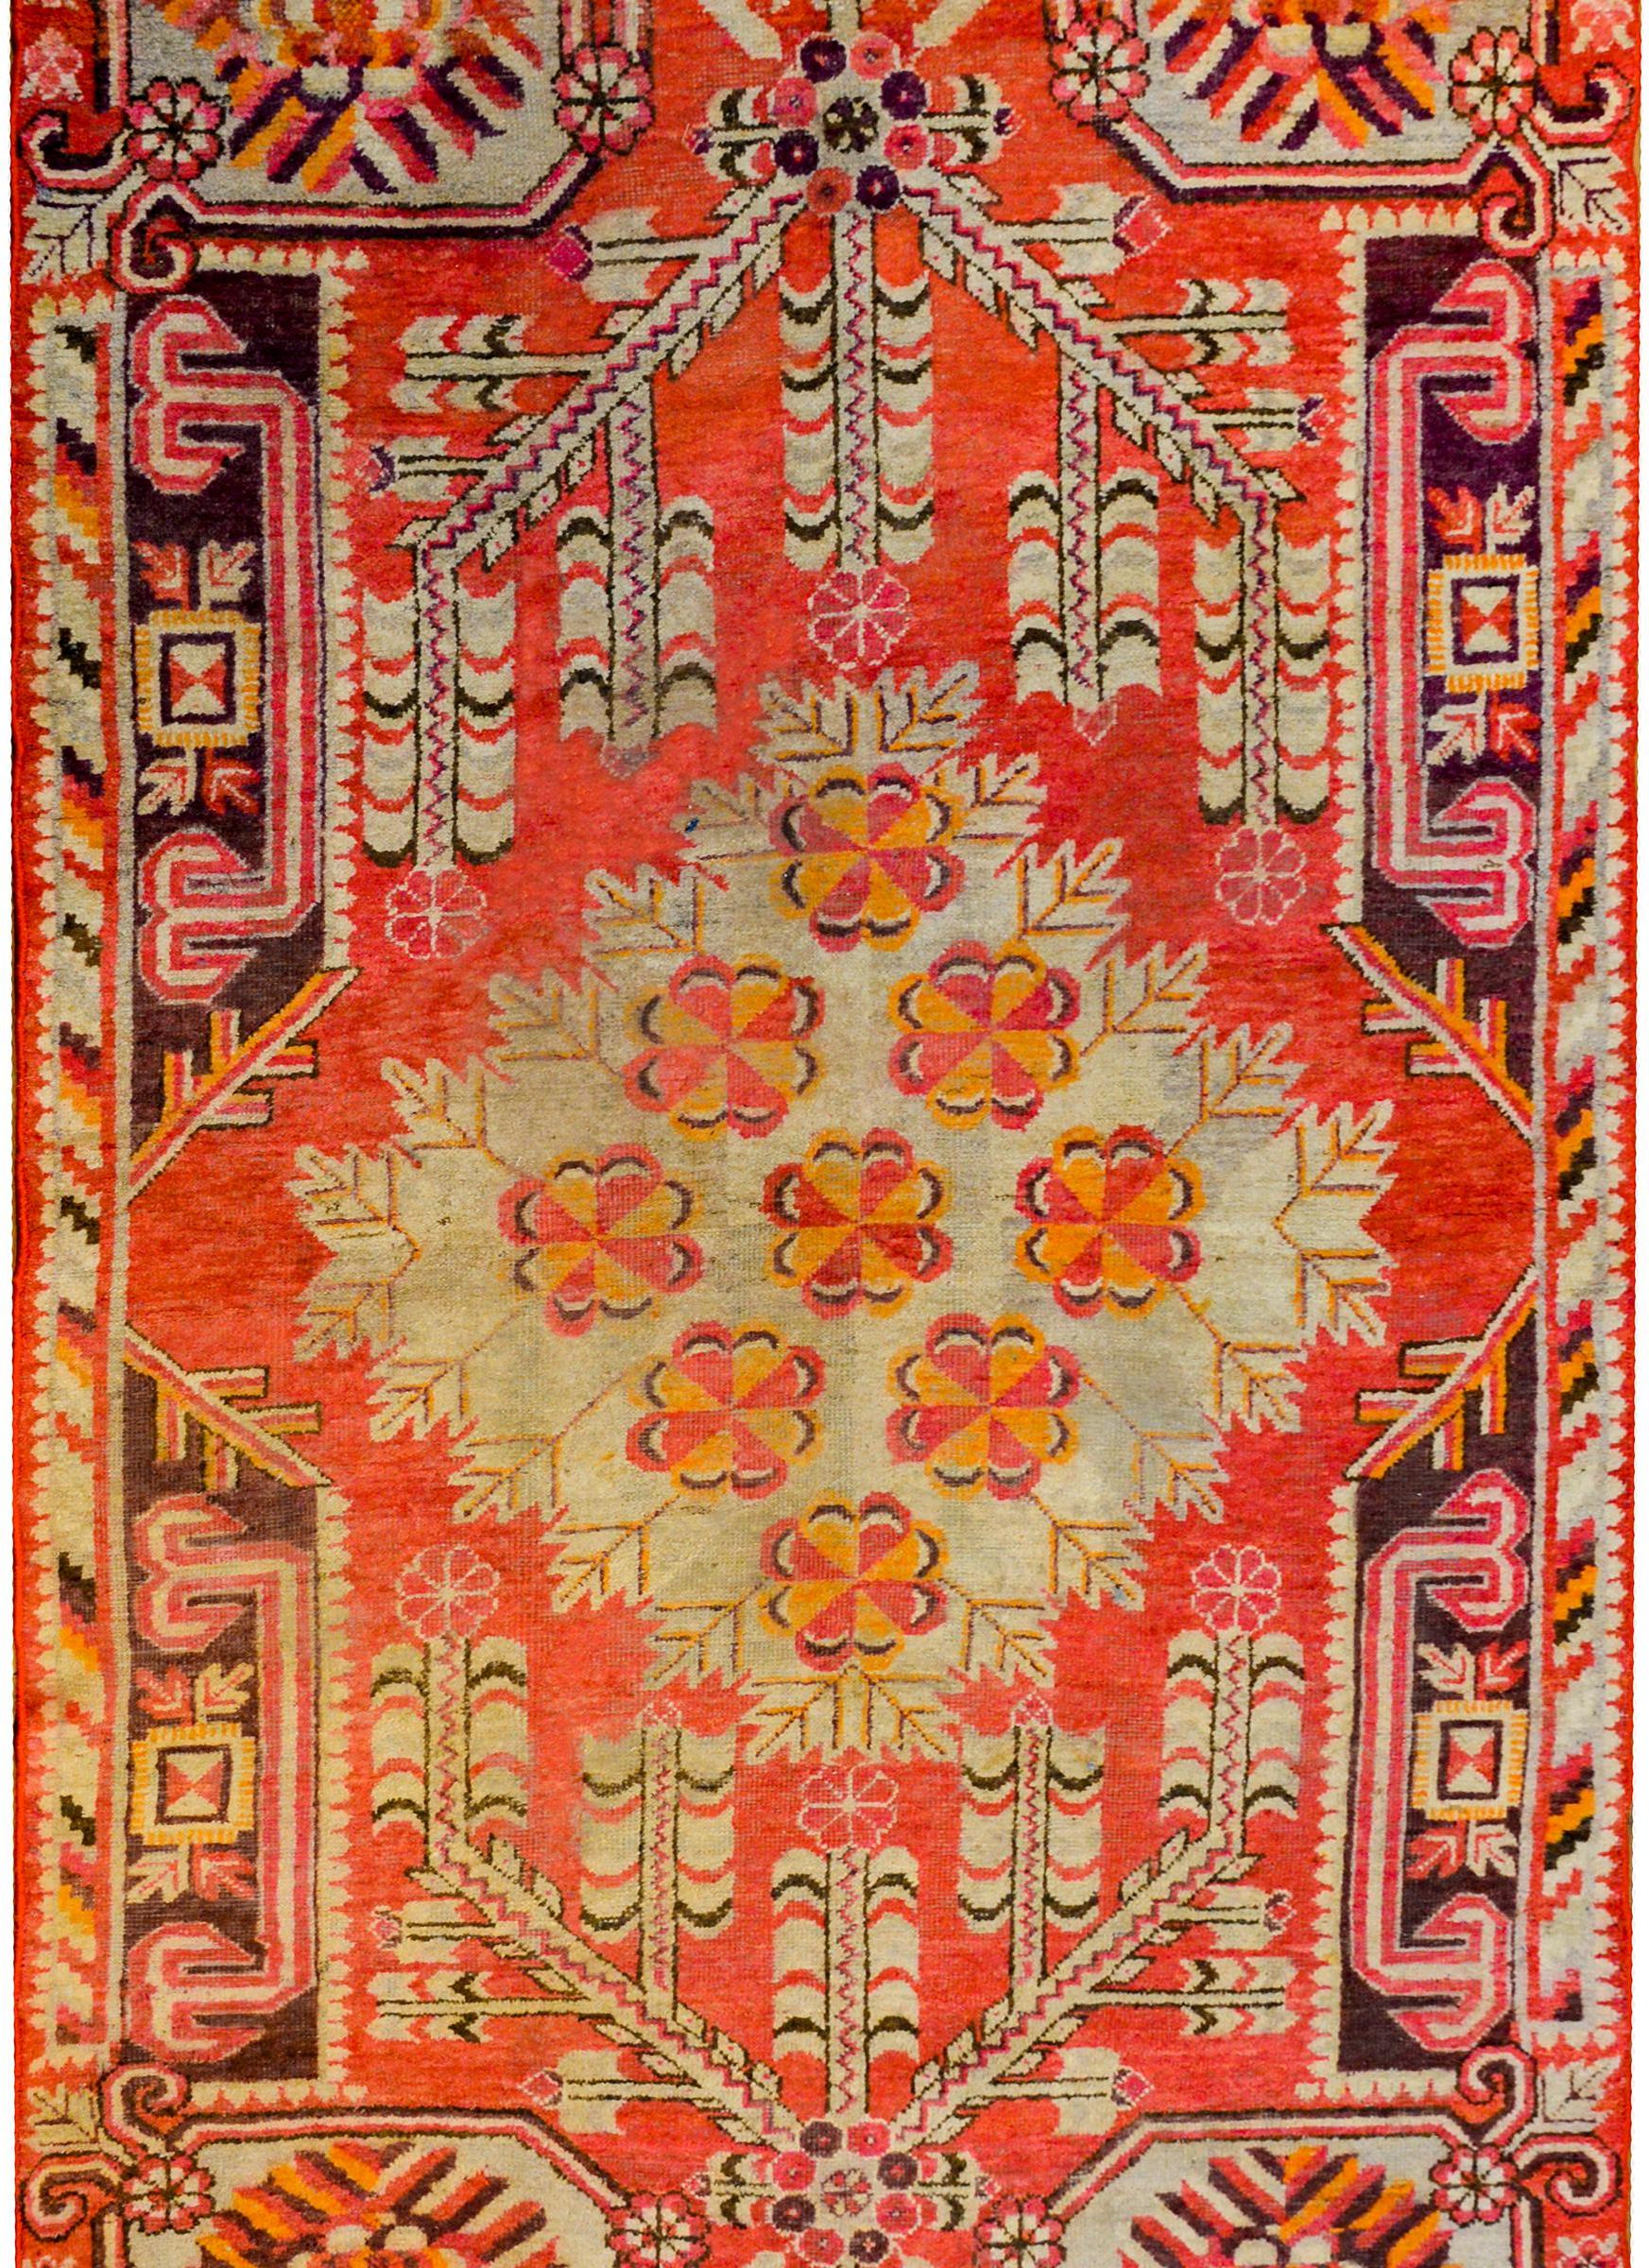 An exceptional early 20th century Central Asian Khotan rug with a fantastic central diamond medallion with multiple pink and orange flowers amidst a field of branches with leaves on a rich coral colored background. The border is wonderful with a